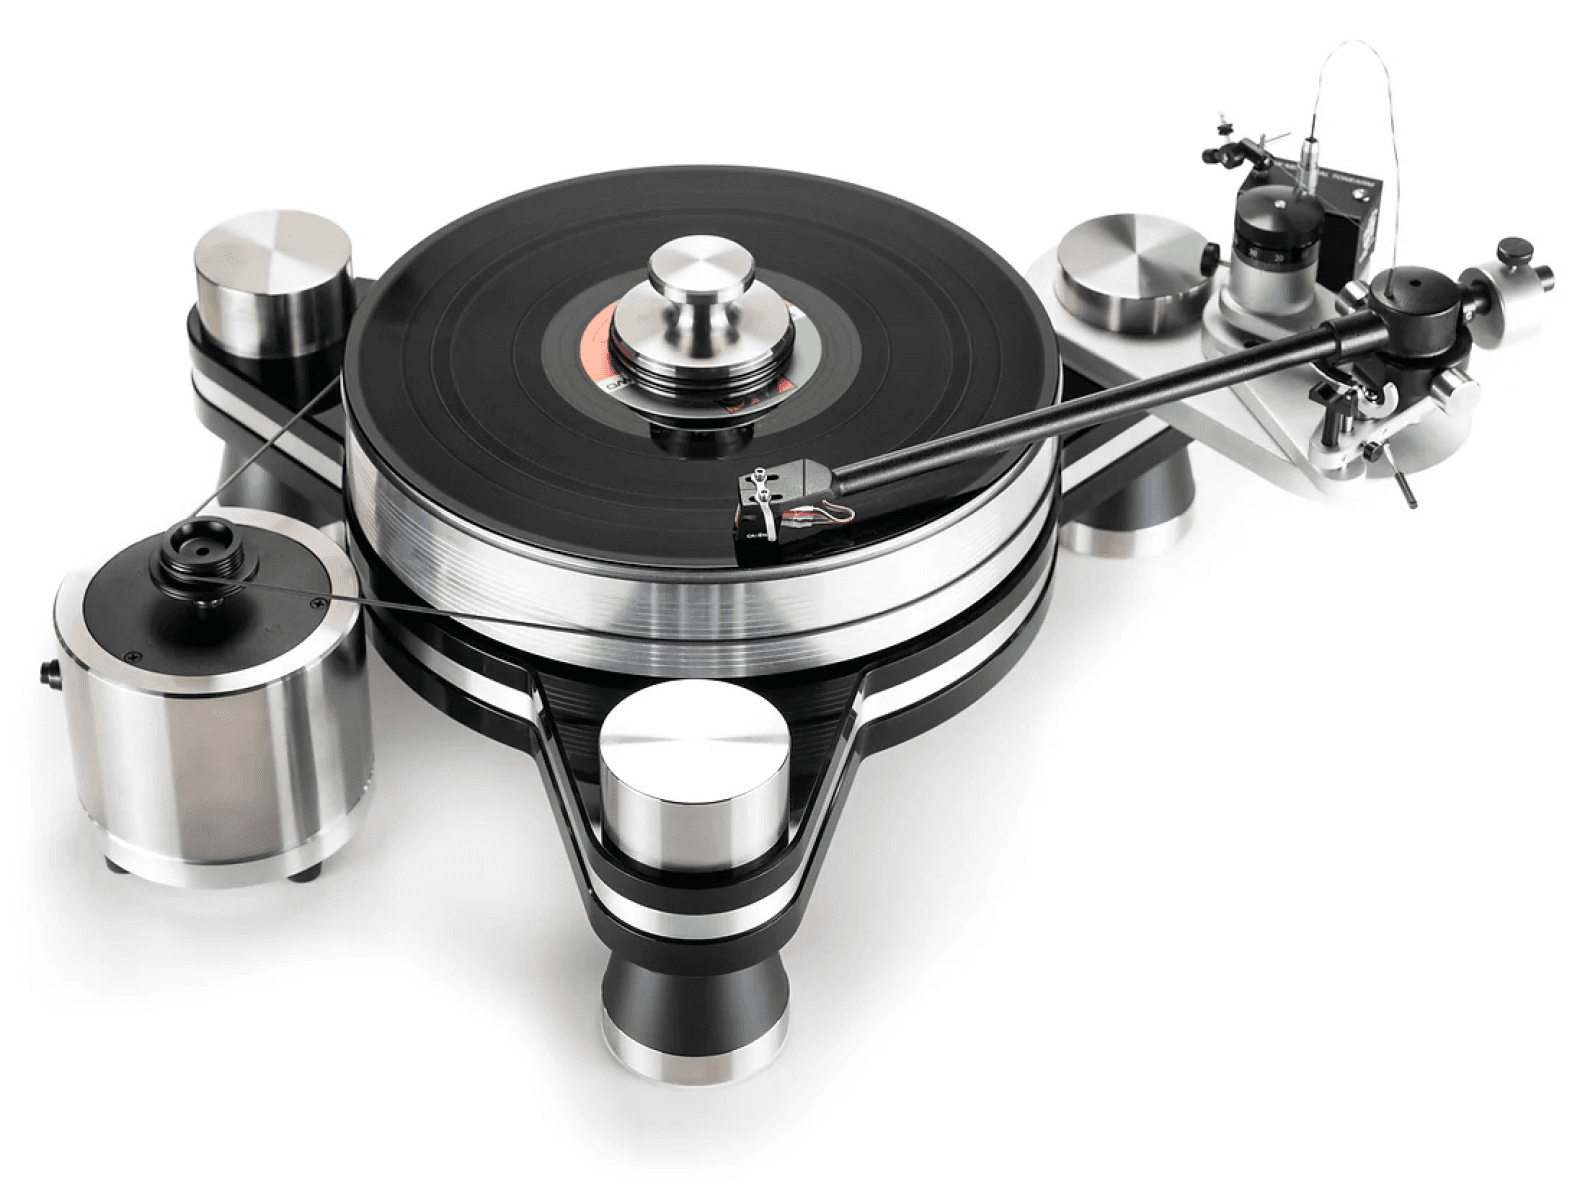 Vpi Avenger Reference Turntable With Gimbal Tonearm And Upgrades